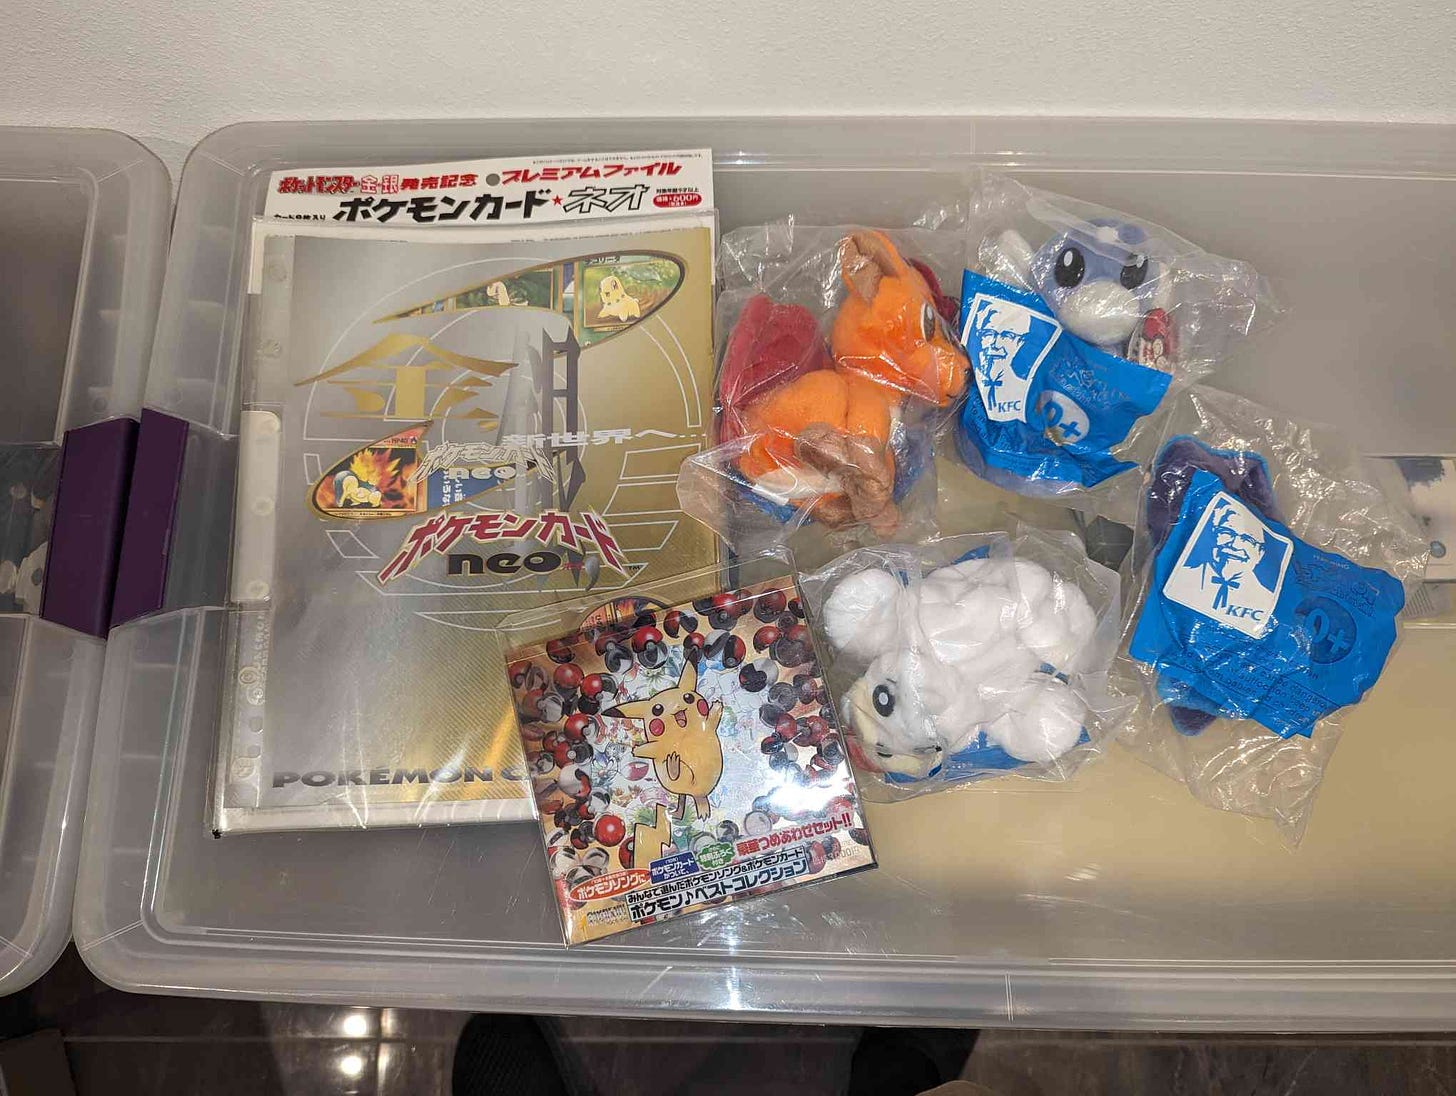 Jaxel kindly shared some photographs of a few items from his Pokémon collection. Here is a picture of his Japanese Neo Genesis Premium File, Pokémon Song Best Collection CD, and all four beanbag plush toys (Dratini, Seel, Vulpix and Zubat) that were purchasable from KFC in 1998